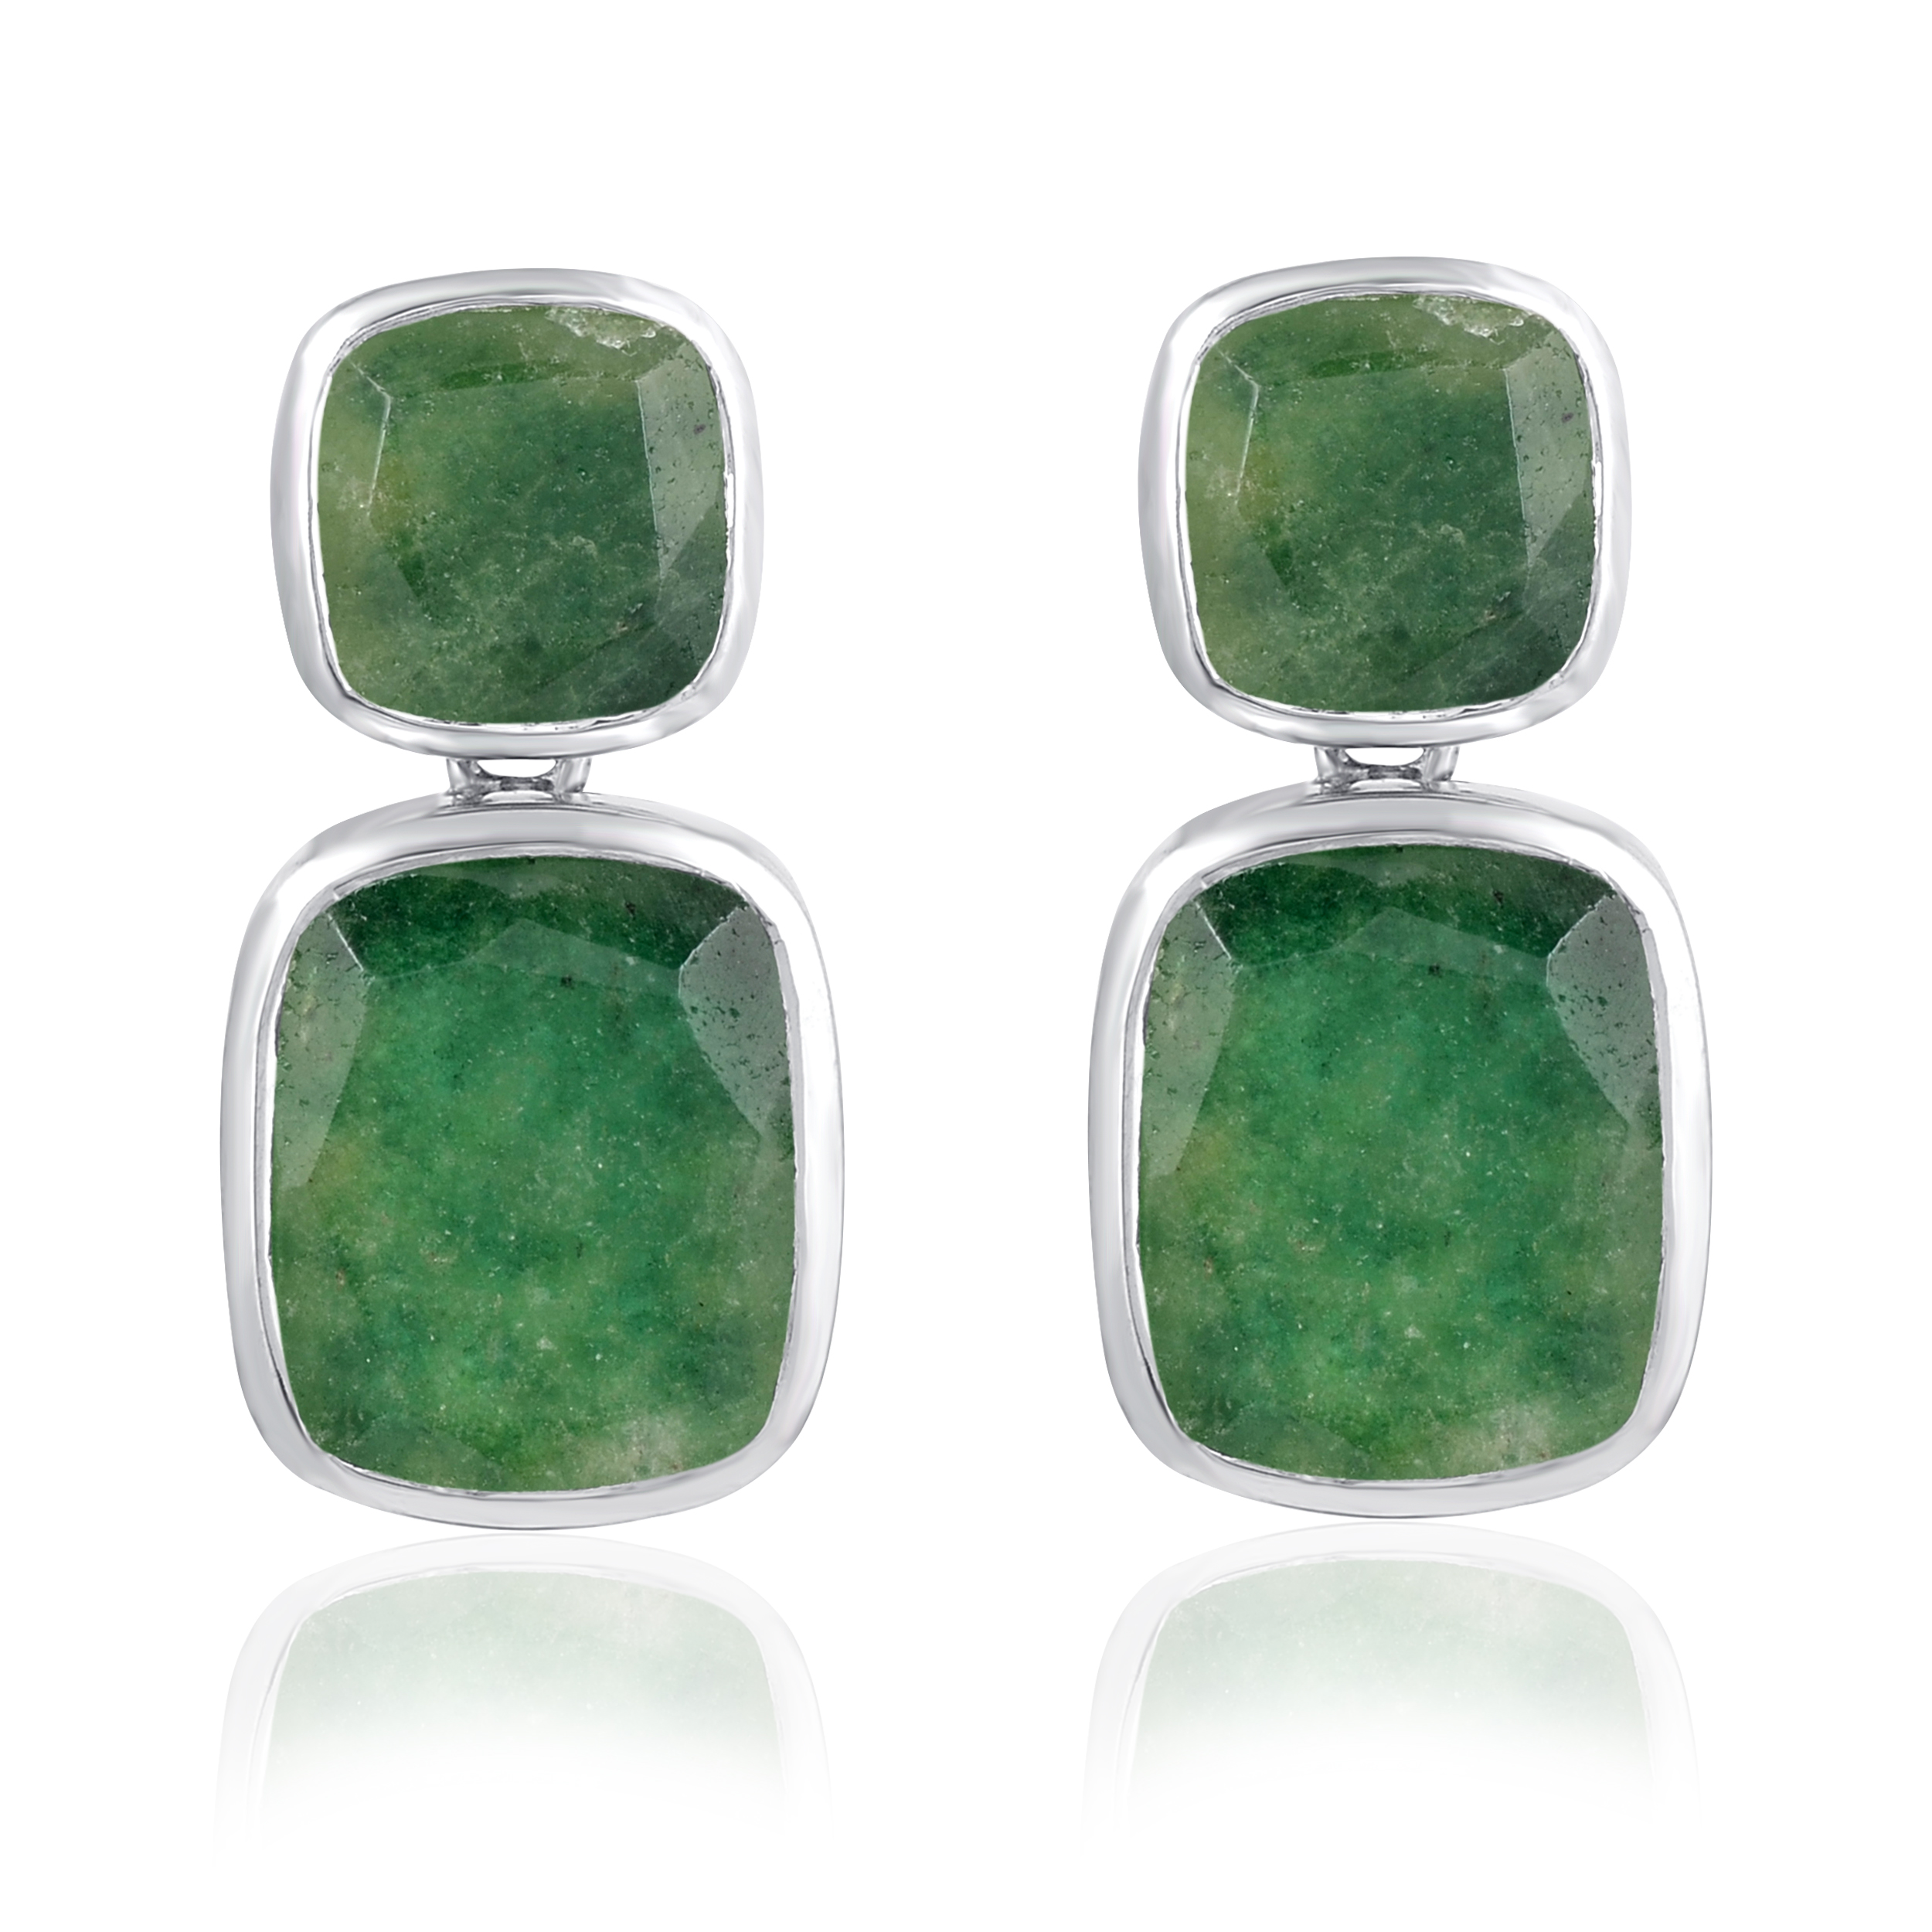 Dangling 14.52 Ctw Dyed Emerald 925 Sterling Silver Cushion Dangle Earrings For Women By Orchid Jewelry - image 3 of 7